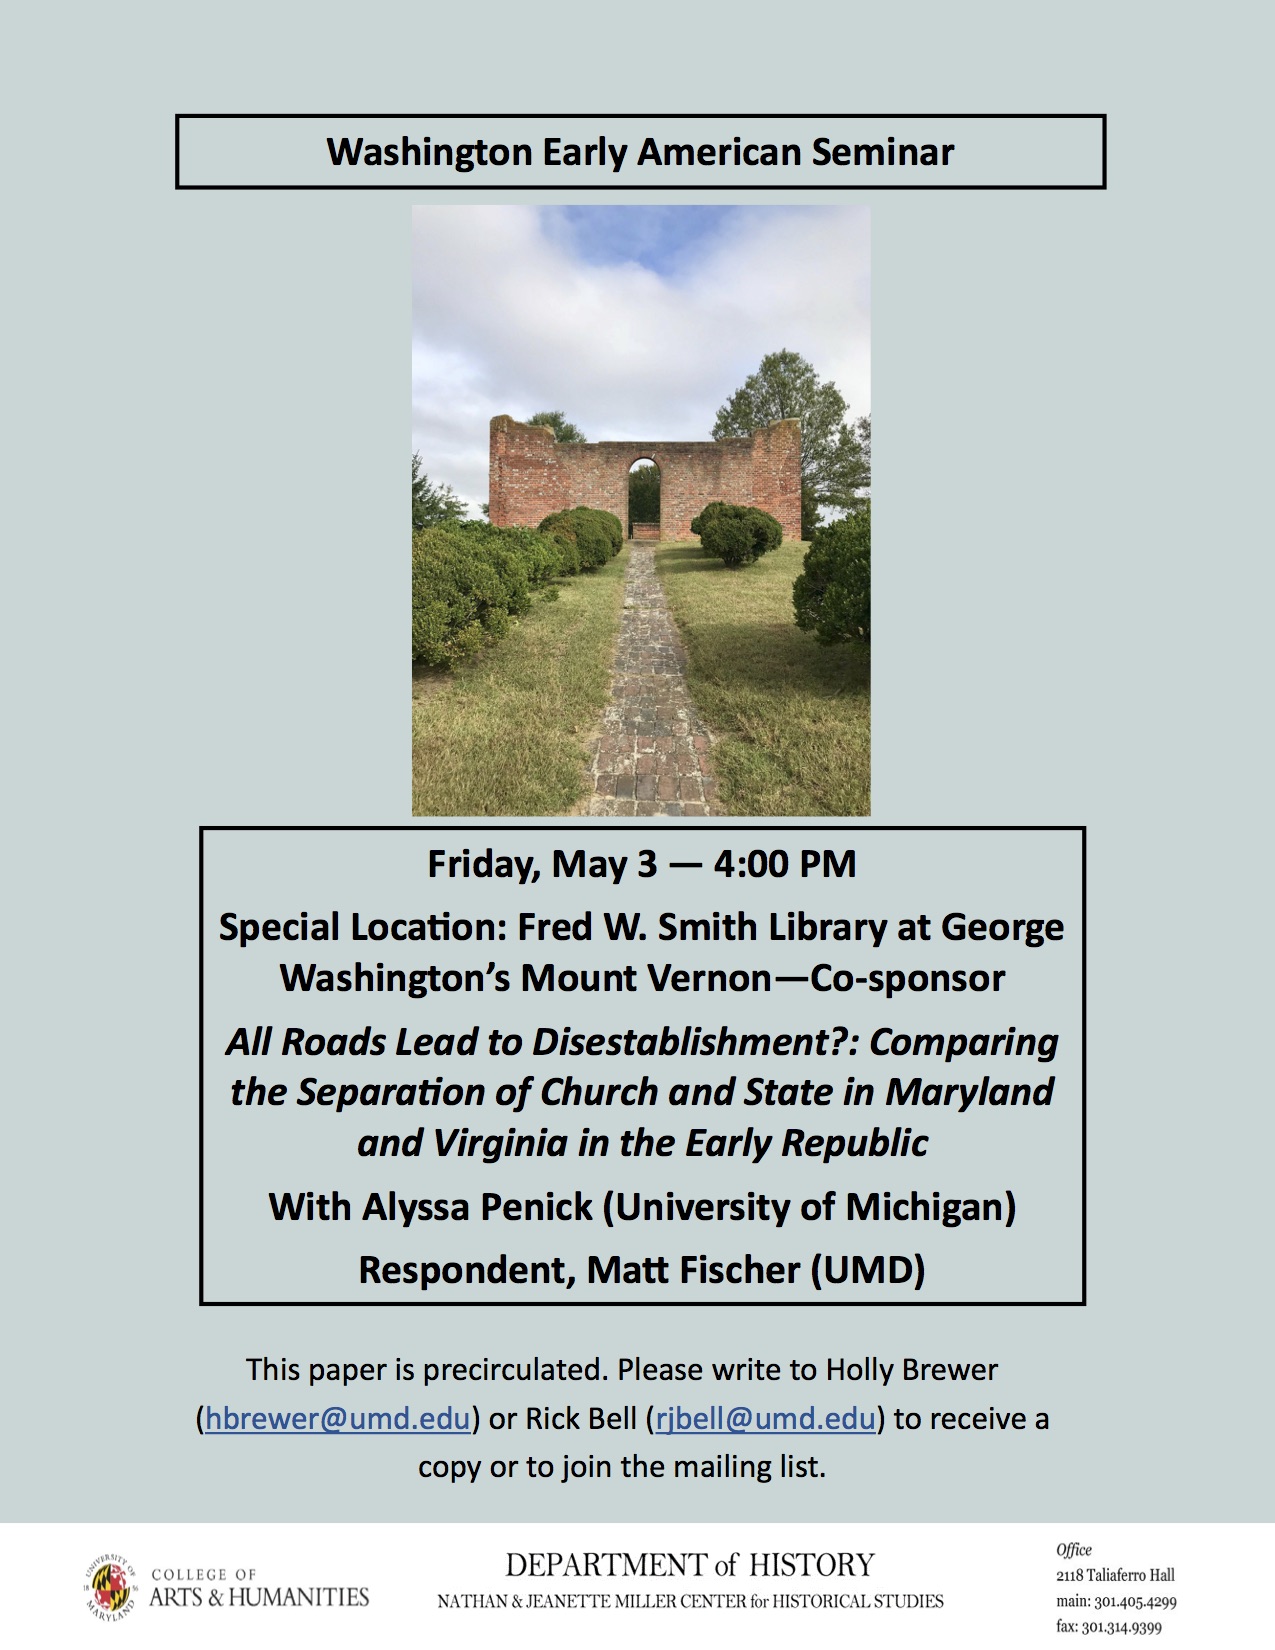 Image for event - All Roads Lead to Disestablishment?: Comparing the Separation of Church and State in Maryland and Virginia in the Early Republic